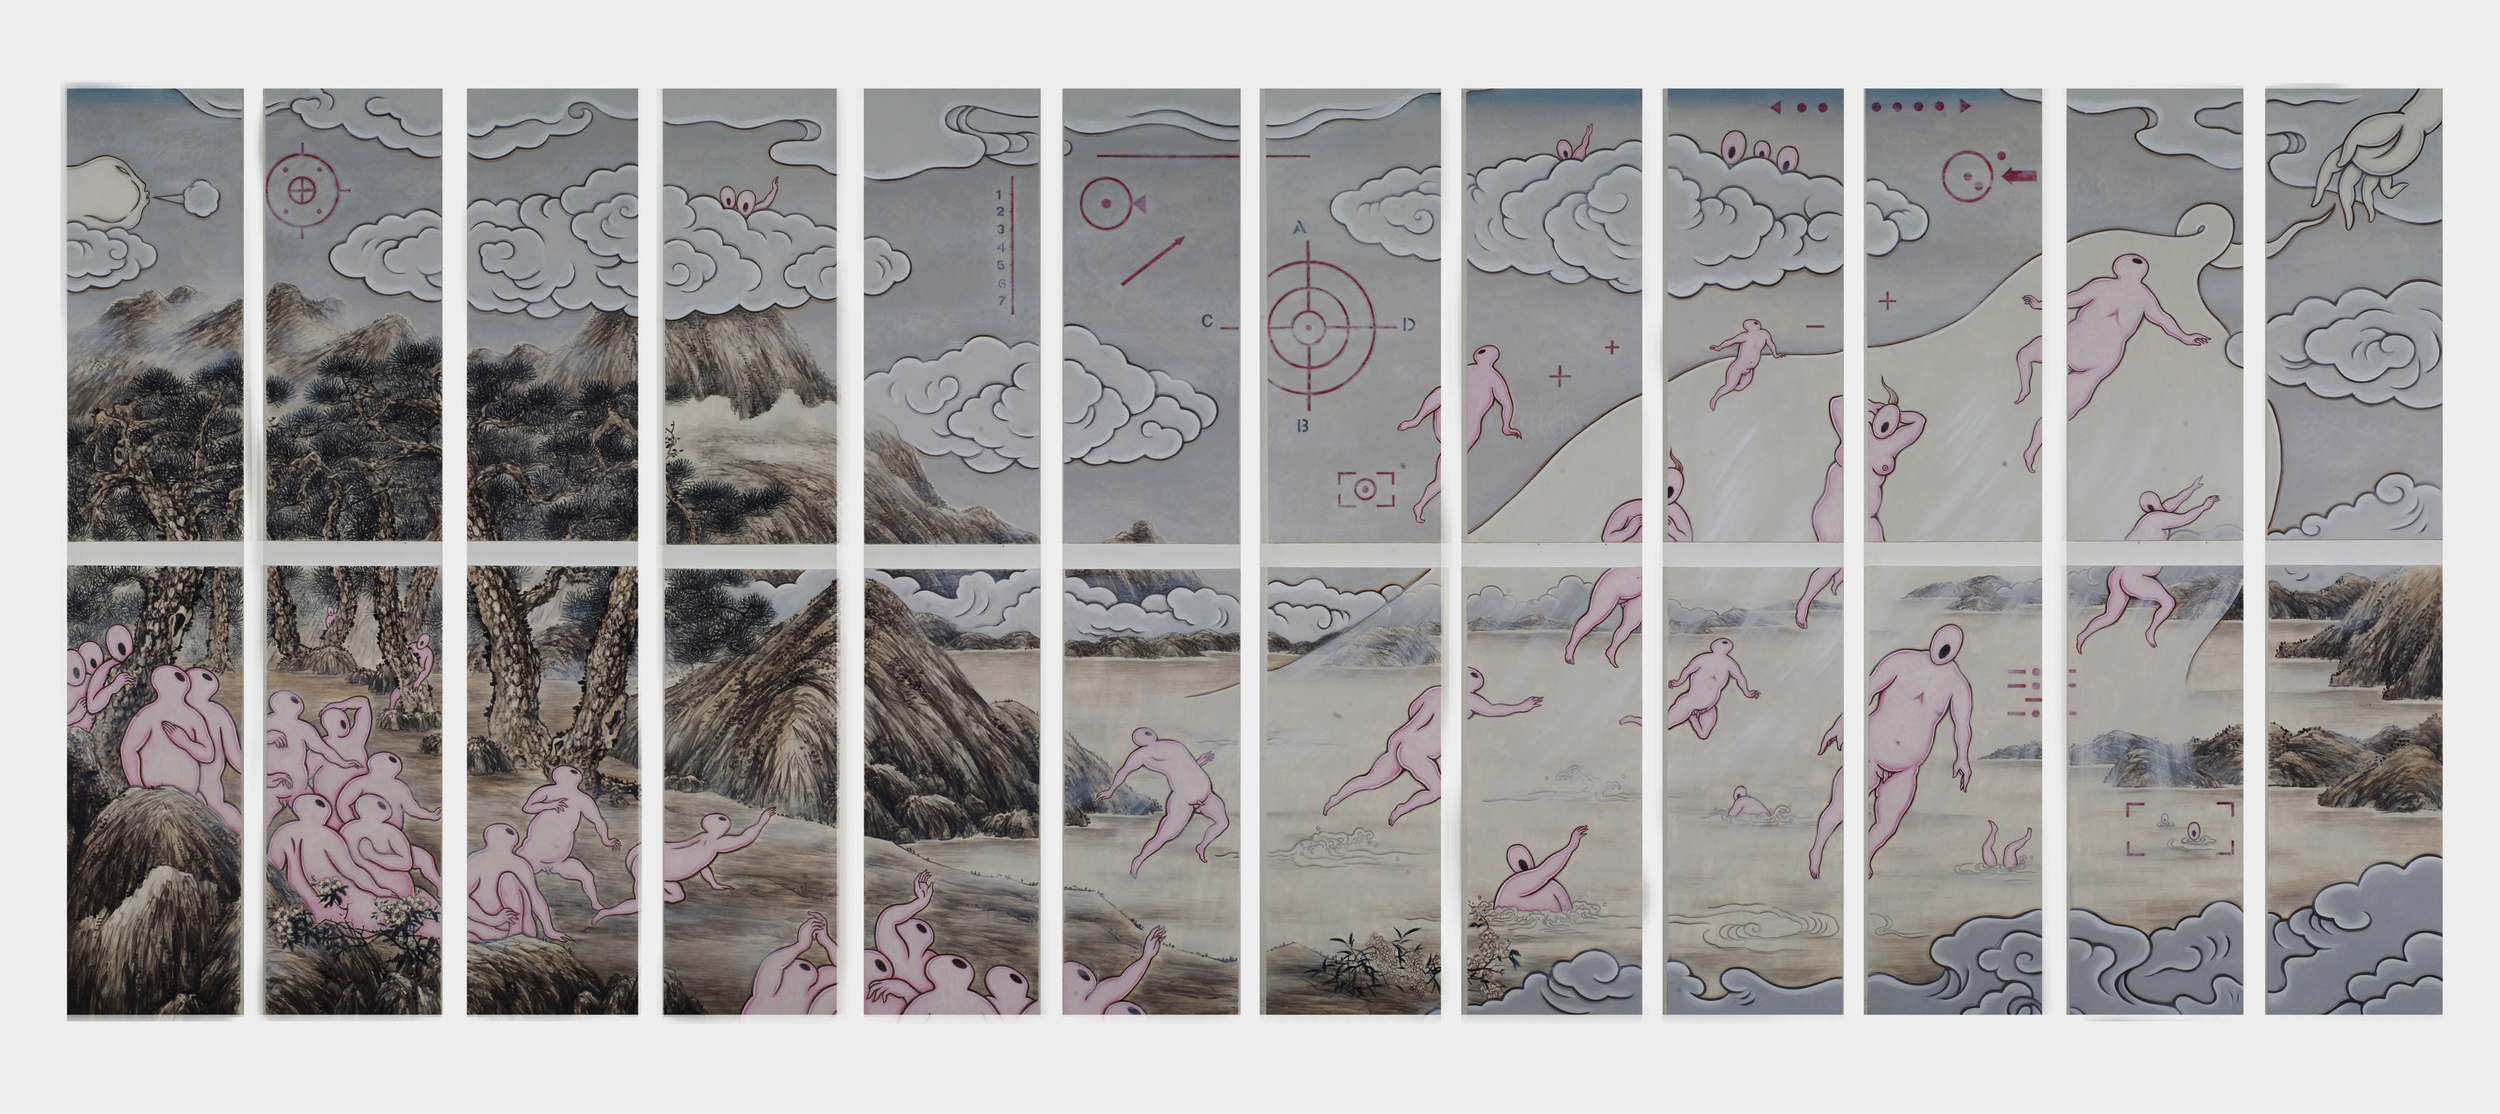   GUAN WEI    Transcendence    2007-2008   Acrylic on canvas 267 x 677 cm  